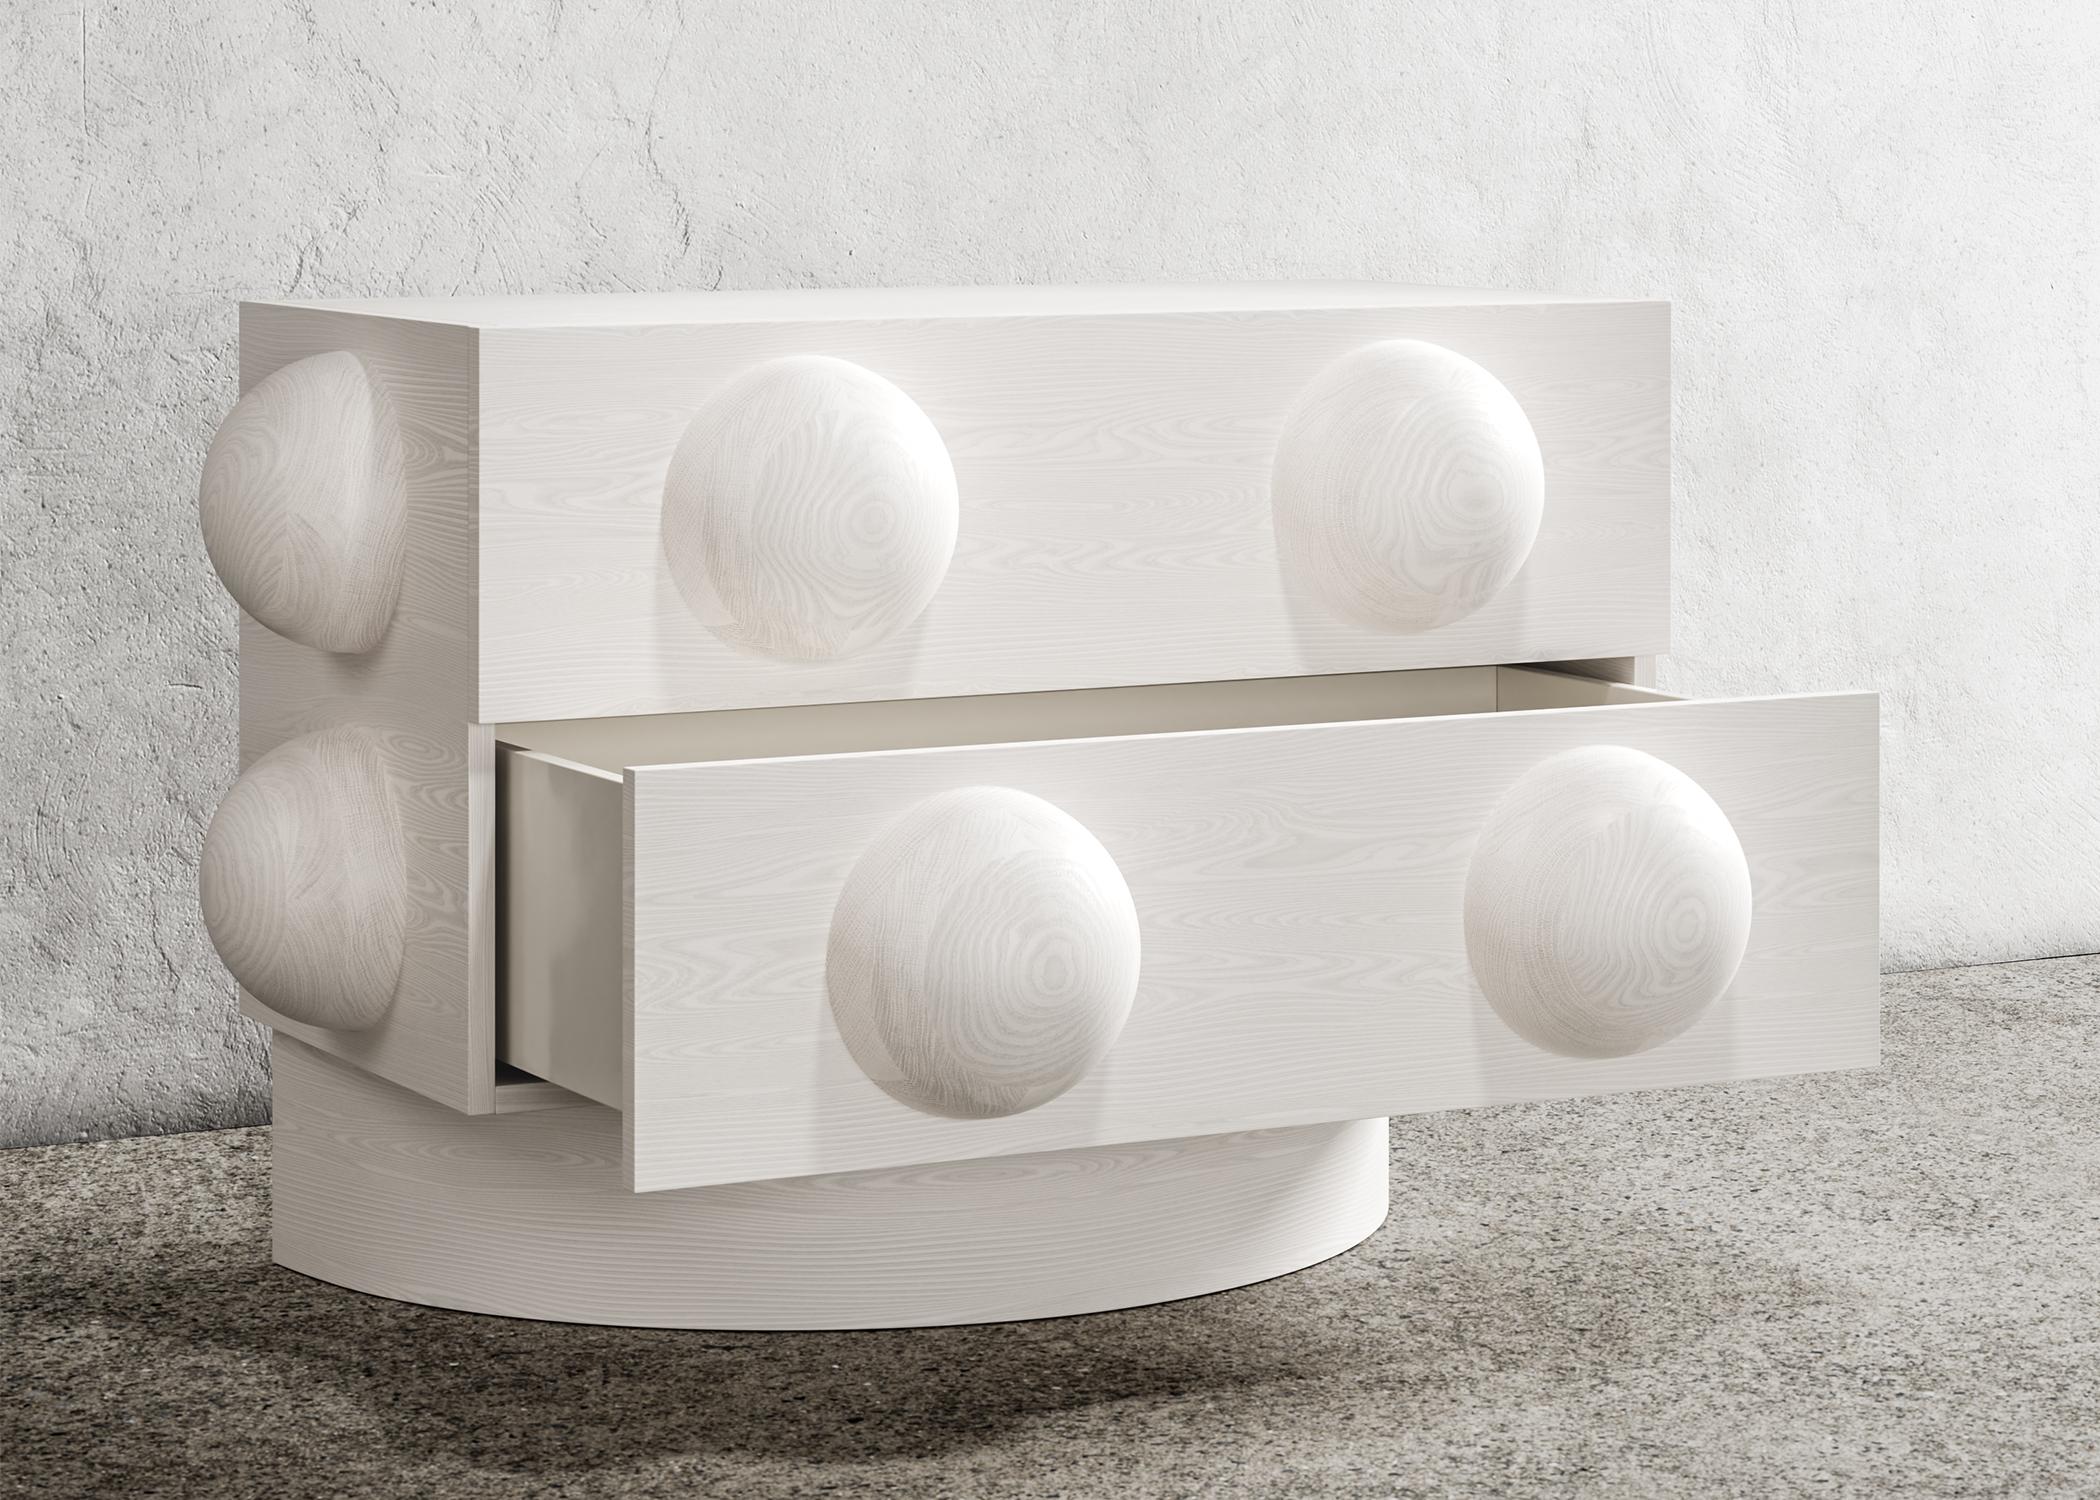 DOT NIGHTSTAND - Modern Bleached White Oak Body and Base

The Dot Nightstand is a contemporary piece of furniture with a unique design element - a sculpted wood sphere detail - and wood plinth bases, which give it an architectural feel. This modern